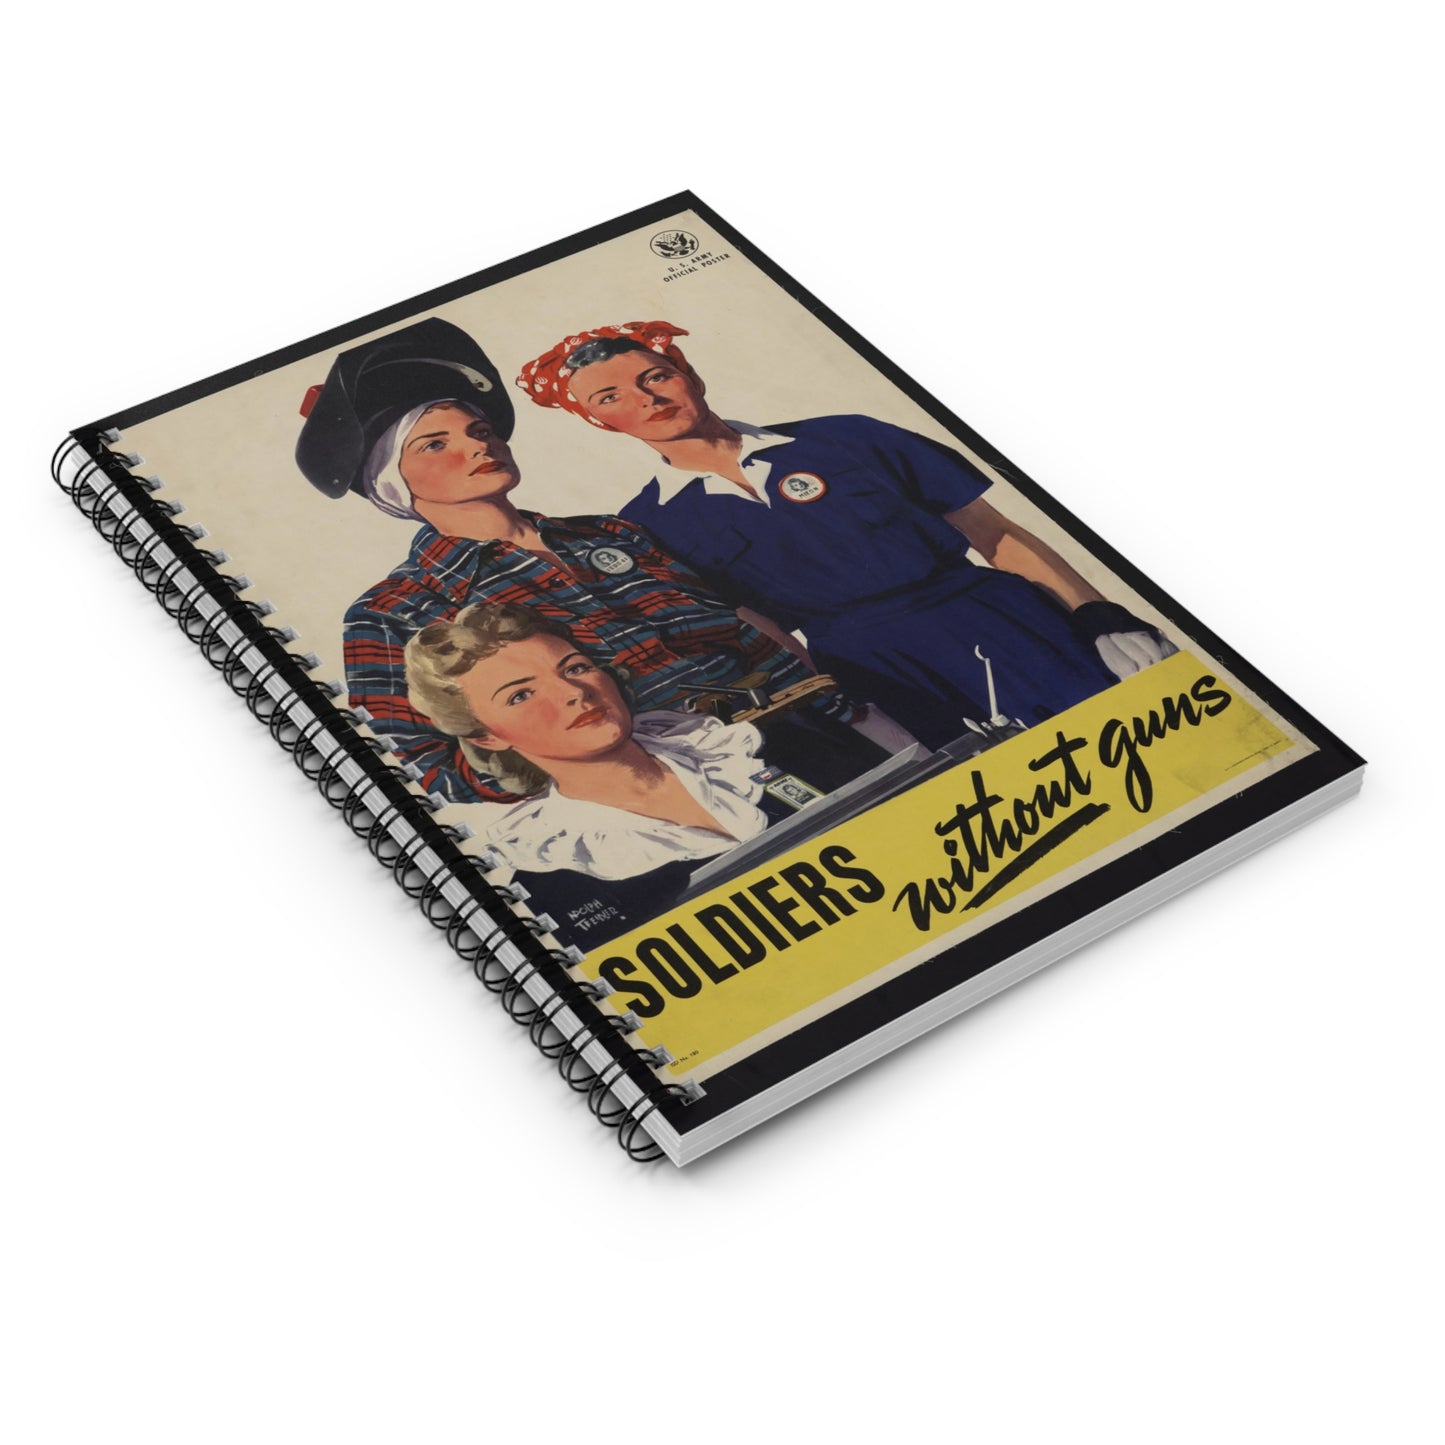 Vintage 'Soldiers Without Guns' Spiral Notebook - Ruled Line